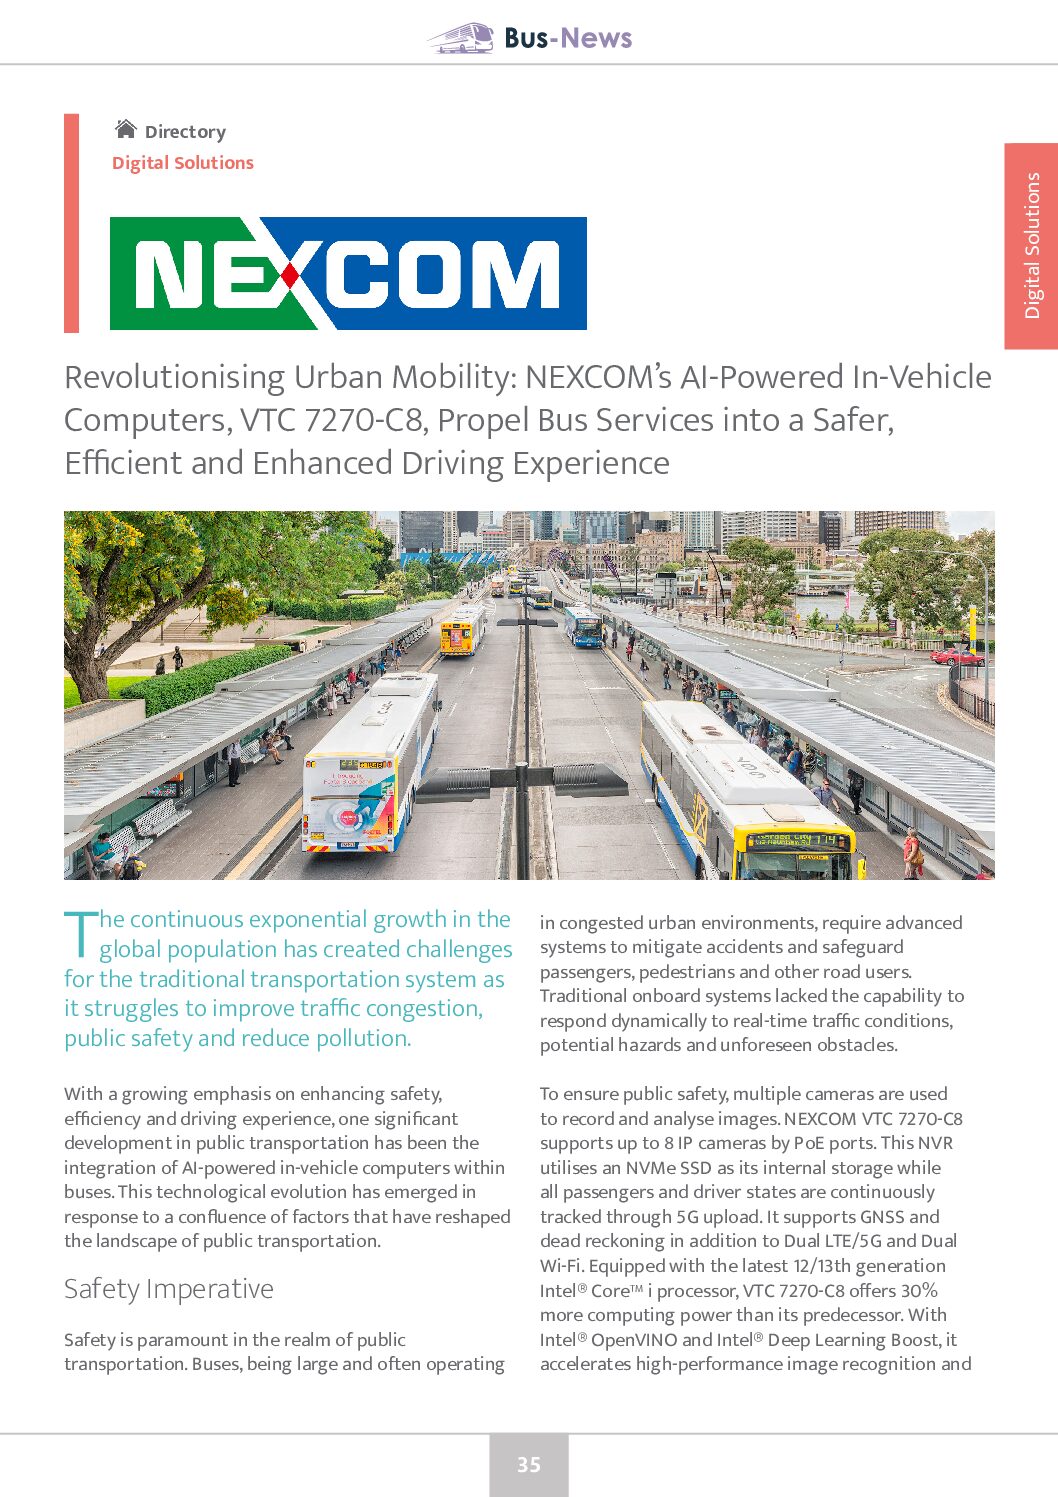 Revolutionising Urban Mobility: NEXCOM’s AI-Powered In-Vehicle Computers